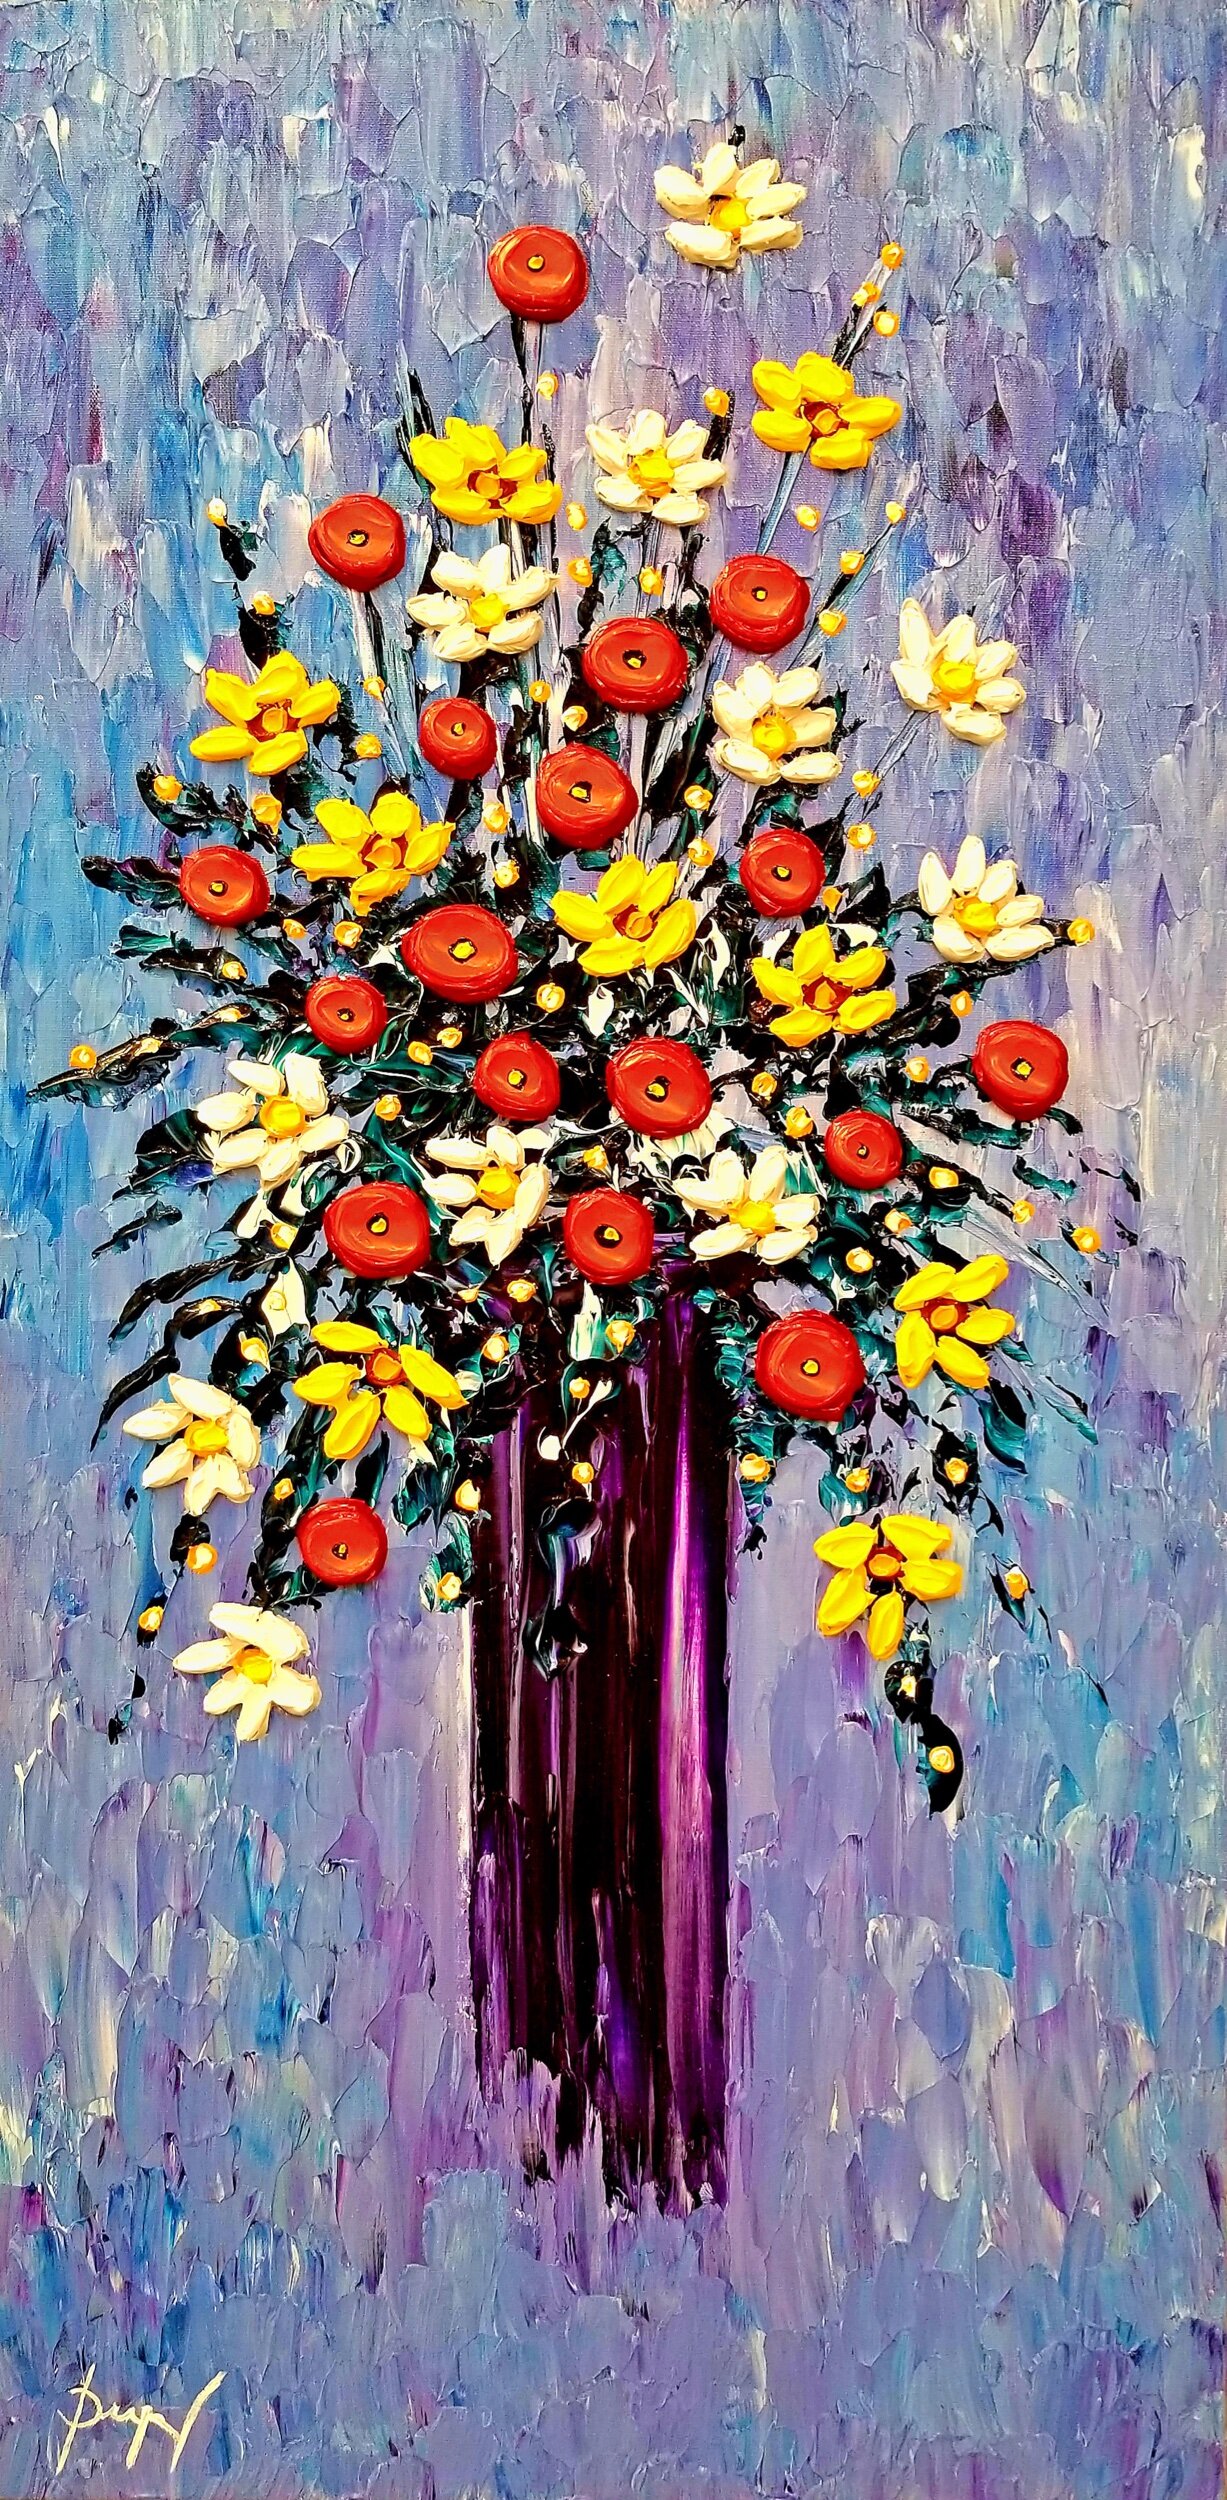 Vase of Colorful Flowers 40x20